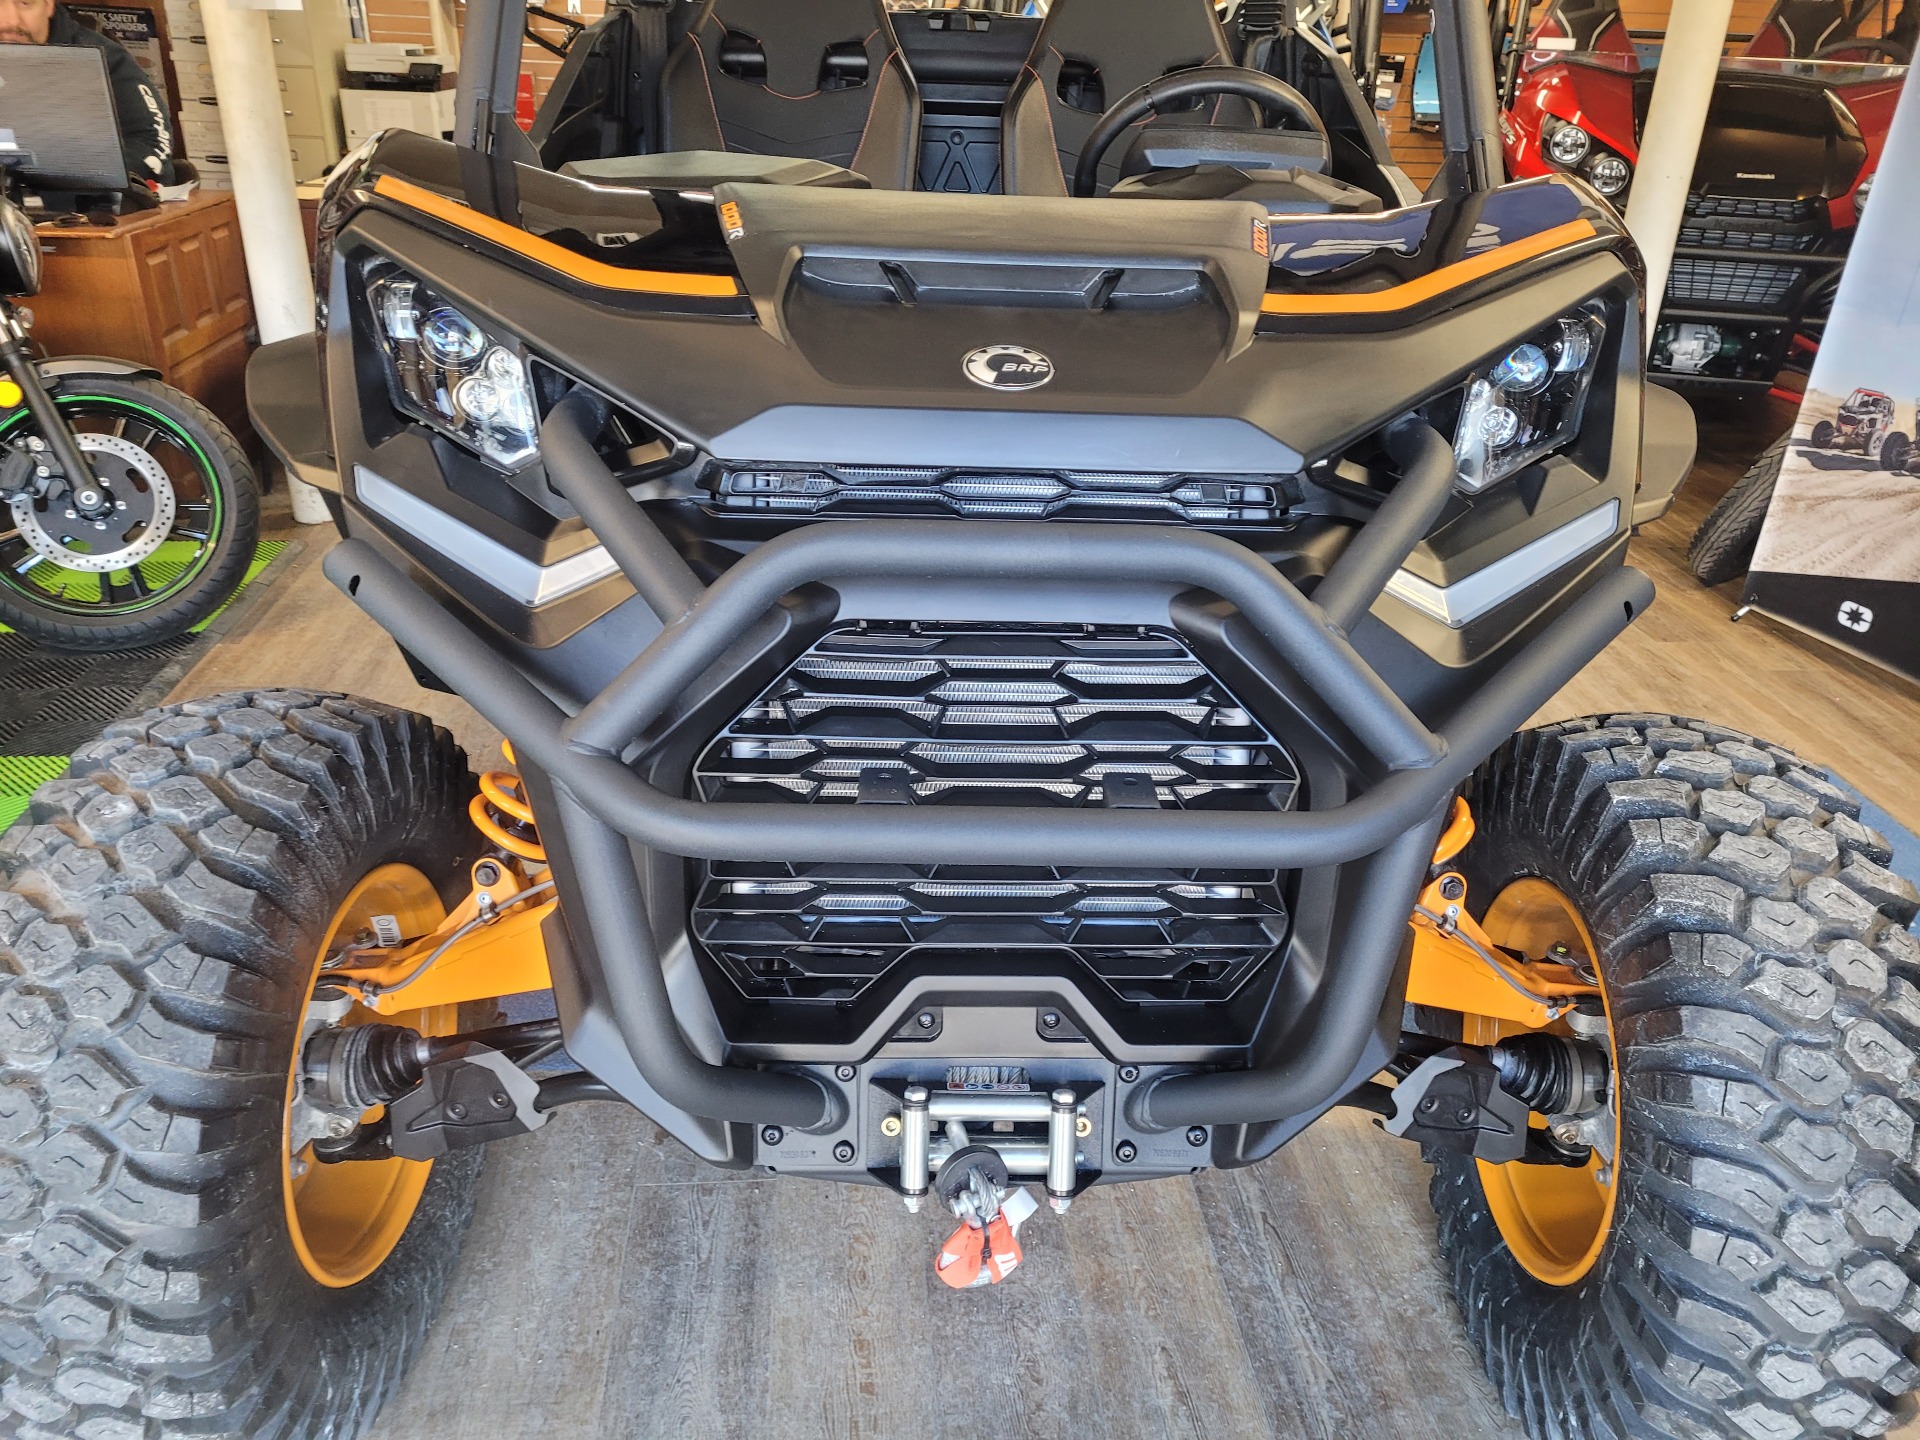 2022 Can-Am Commander XT-P 1000R in Ledgewood, New Jersey - Photo 5